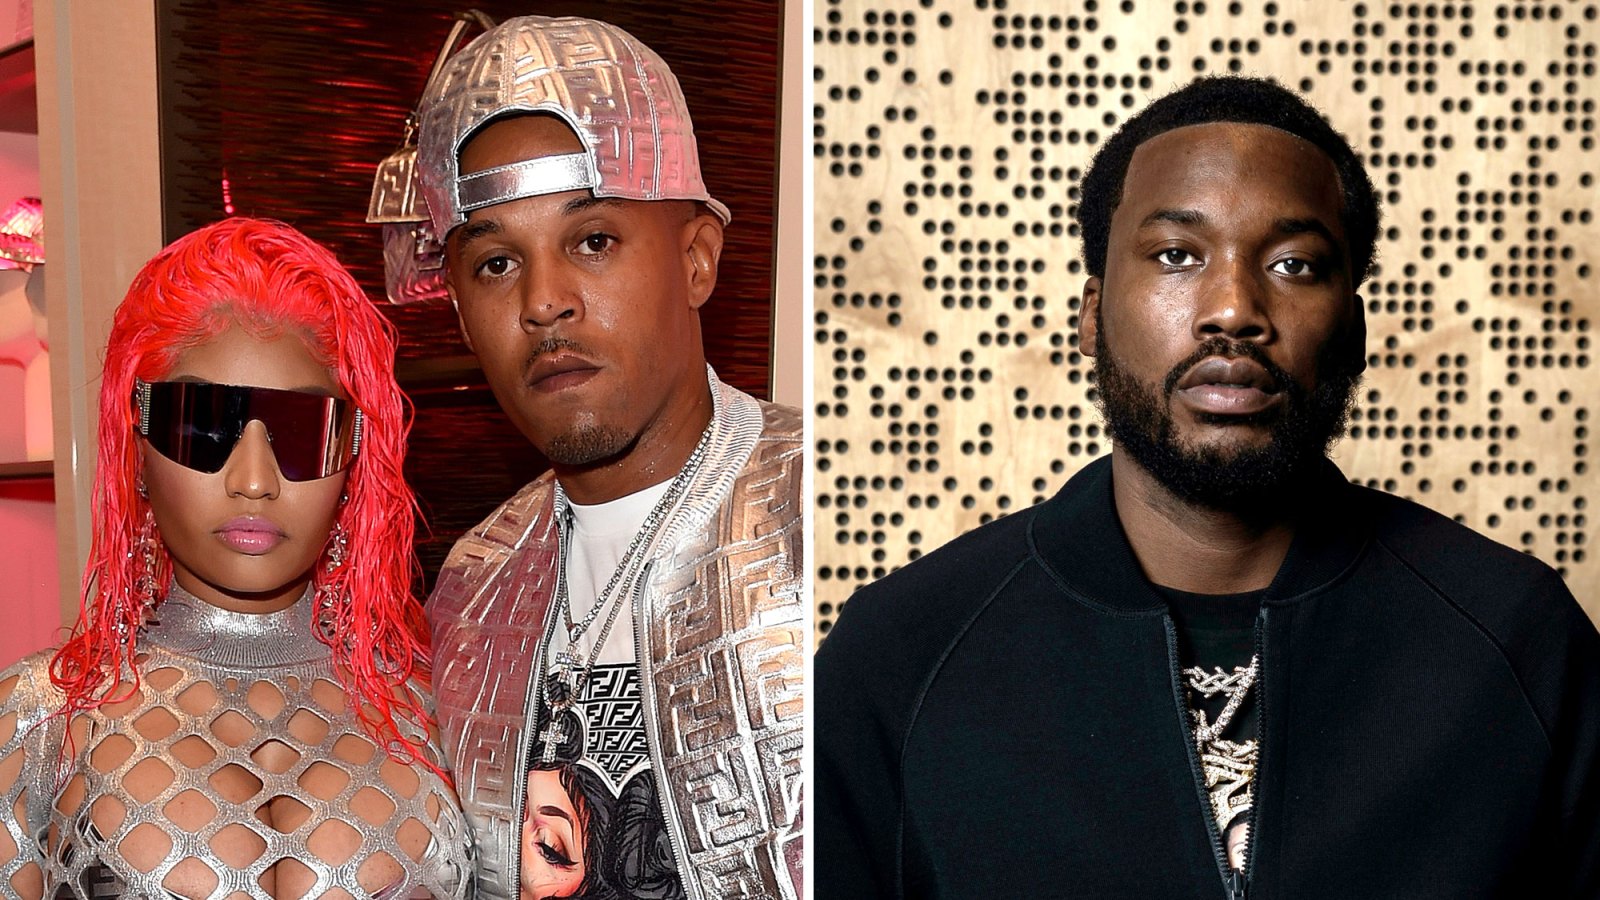 Nicki Minaj and Husband Kenneth Petty Get Into Heated Argument With Her Ex Meek Mill